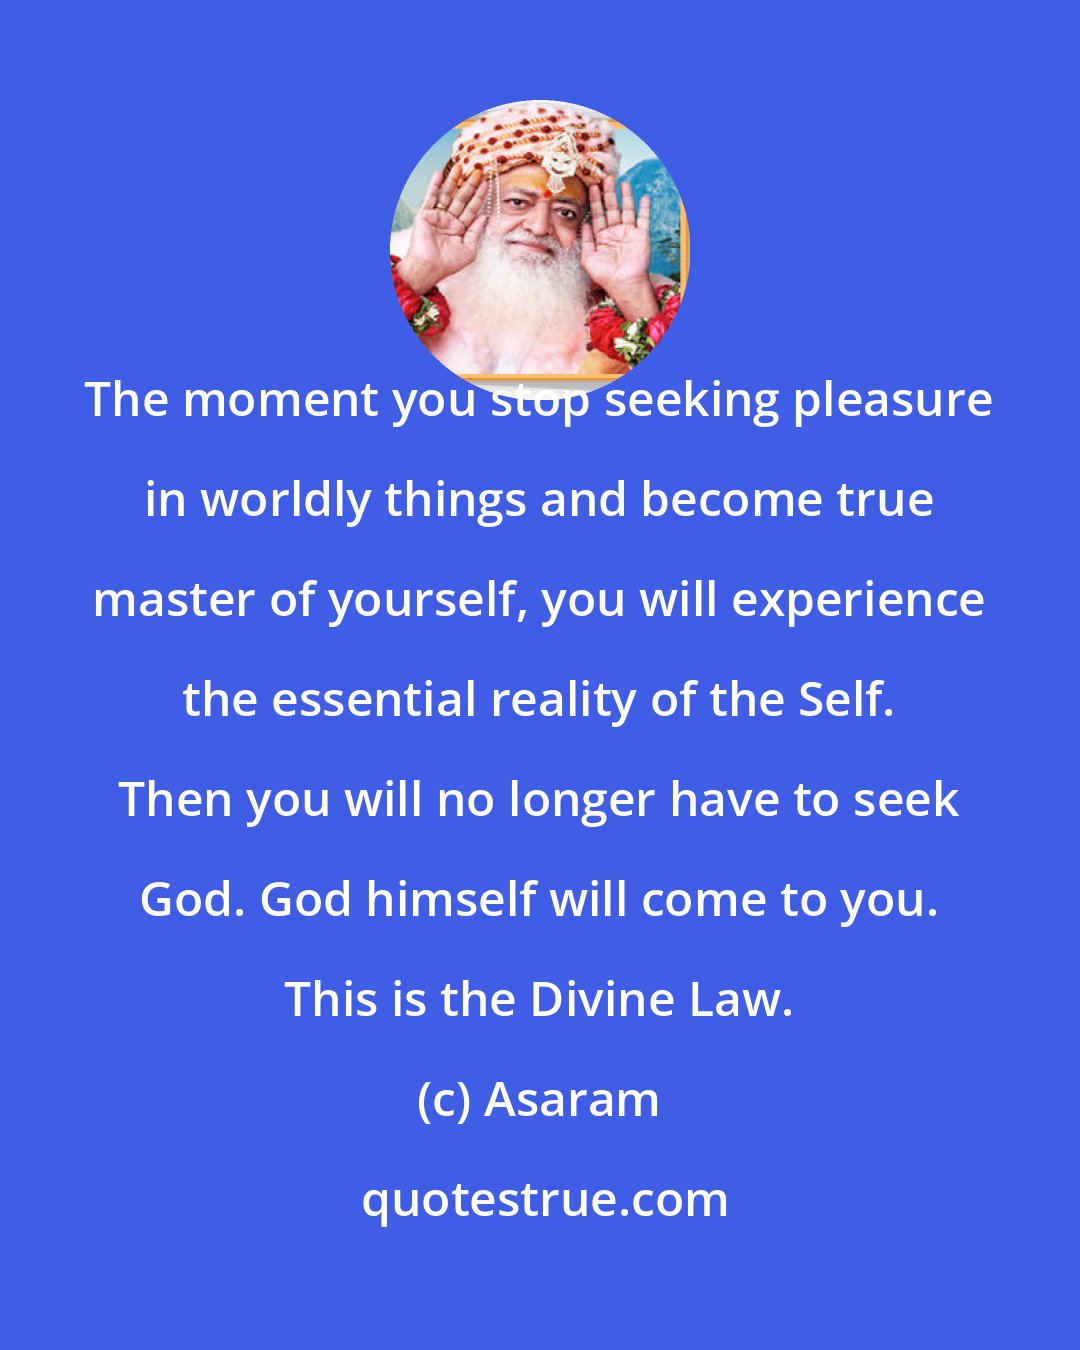 Asaram: The moment you stop seeking pleasure in worldly things and become true master of yourself, you will experience the essential reality of the Self. Then you will no longer have to seek God. God himself will come to you. This is the Divine Law.